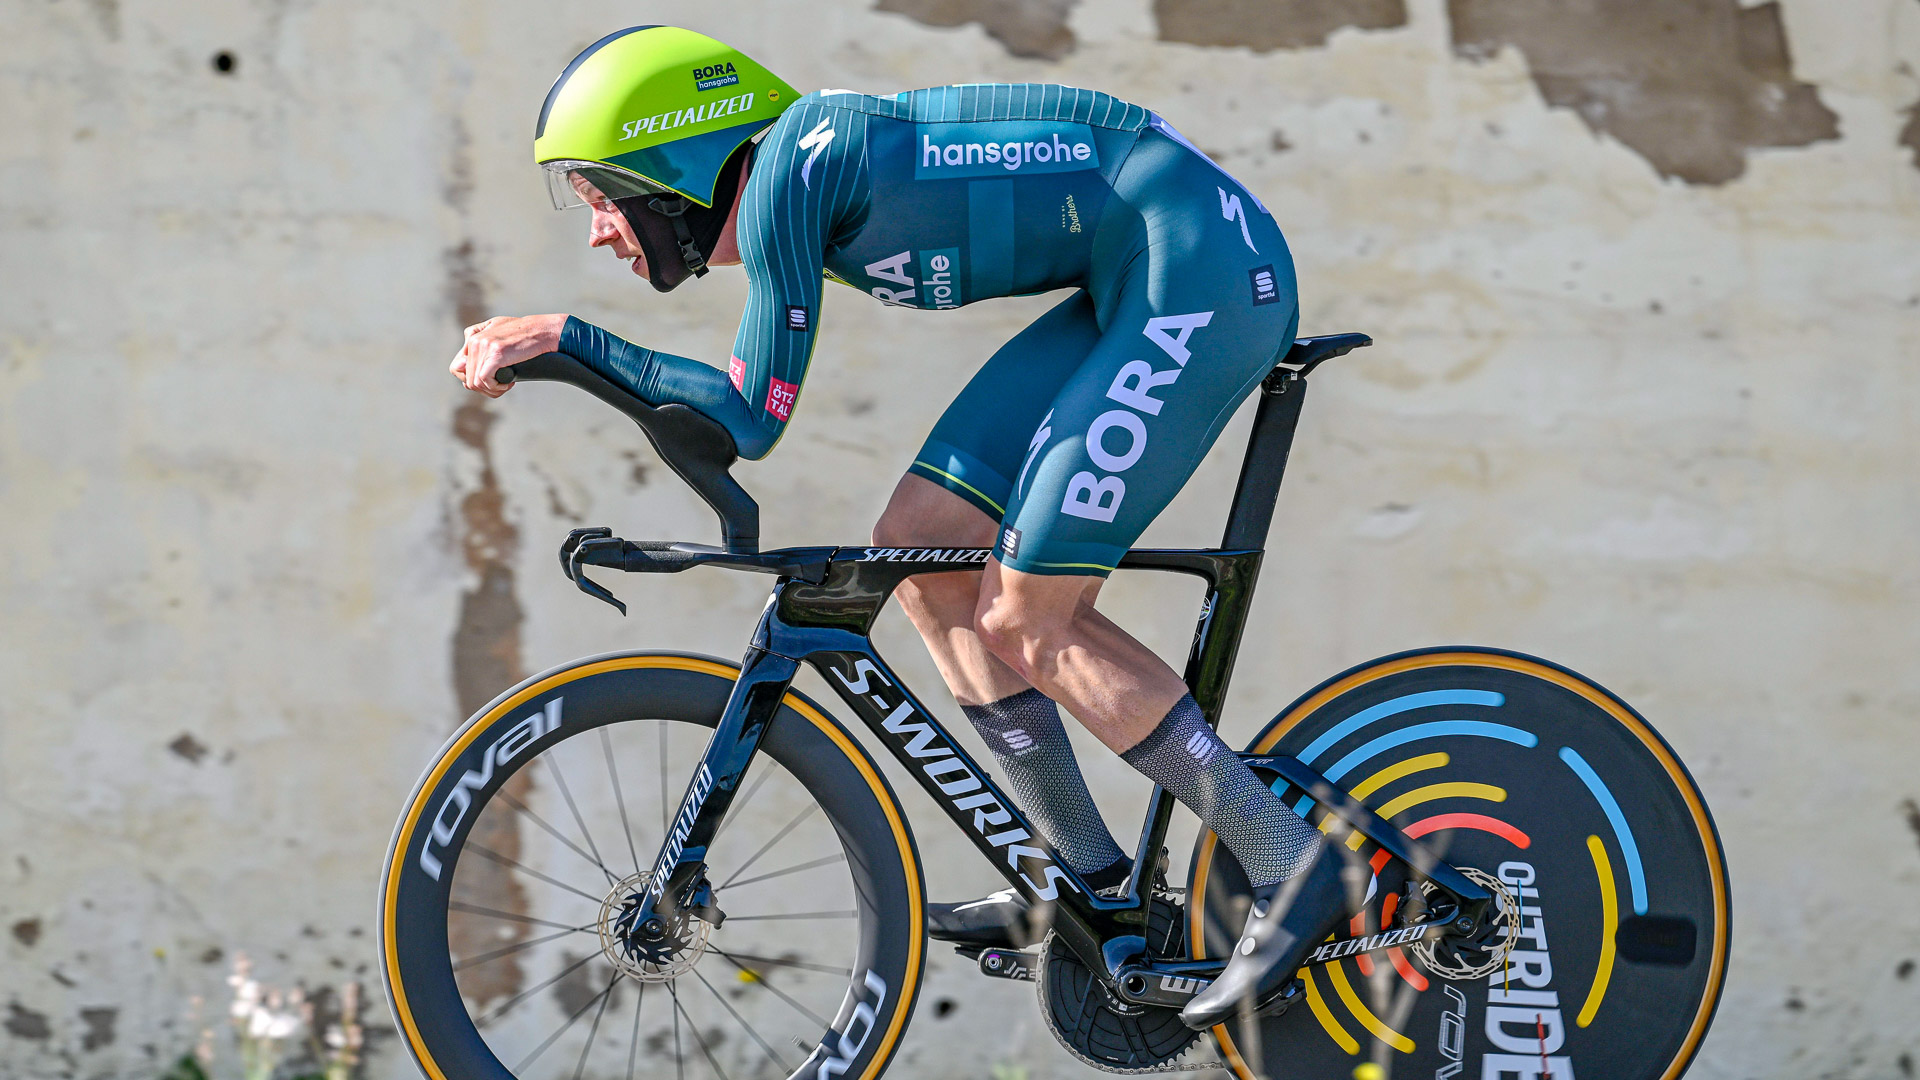 The photo shows Bob Jungels of BORA - Hansgrohe time trialling at the Volta Algarve.